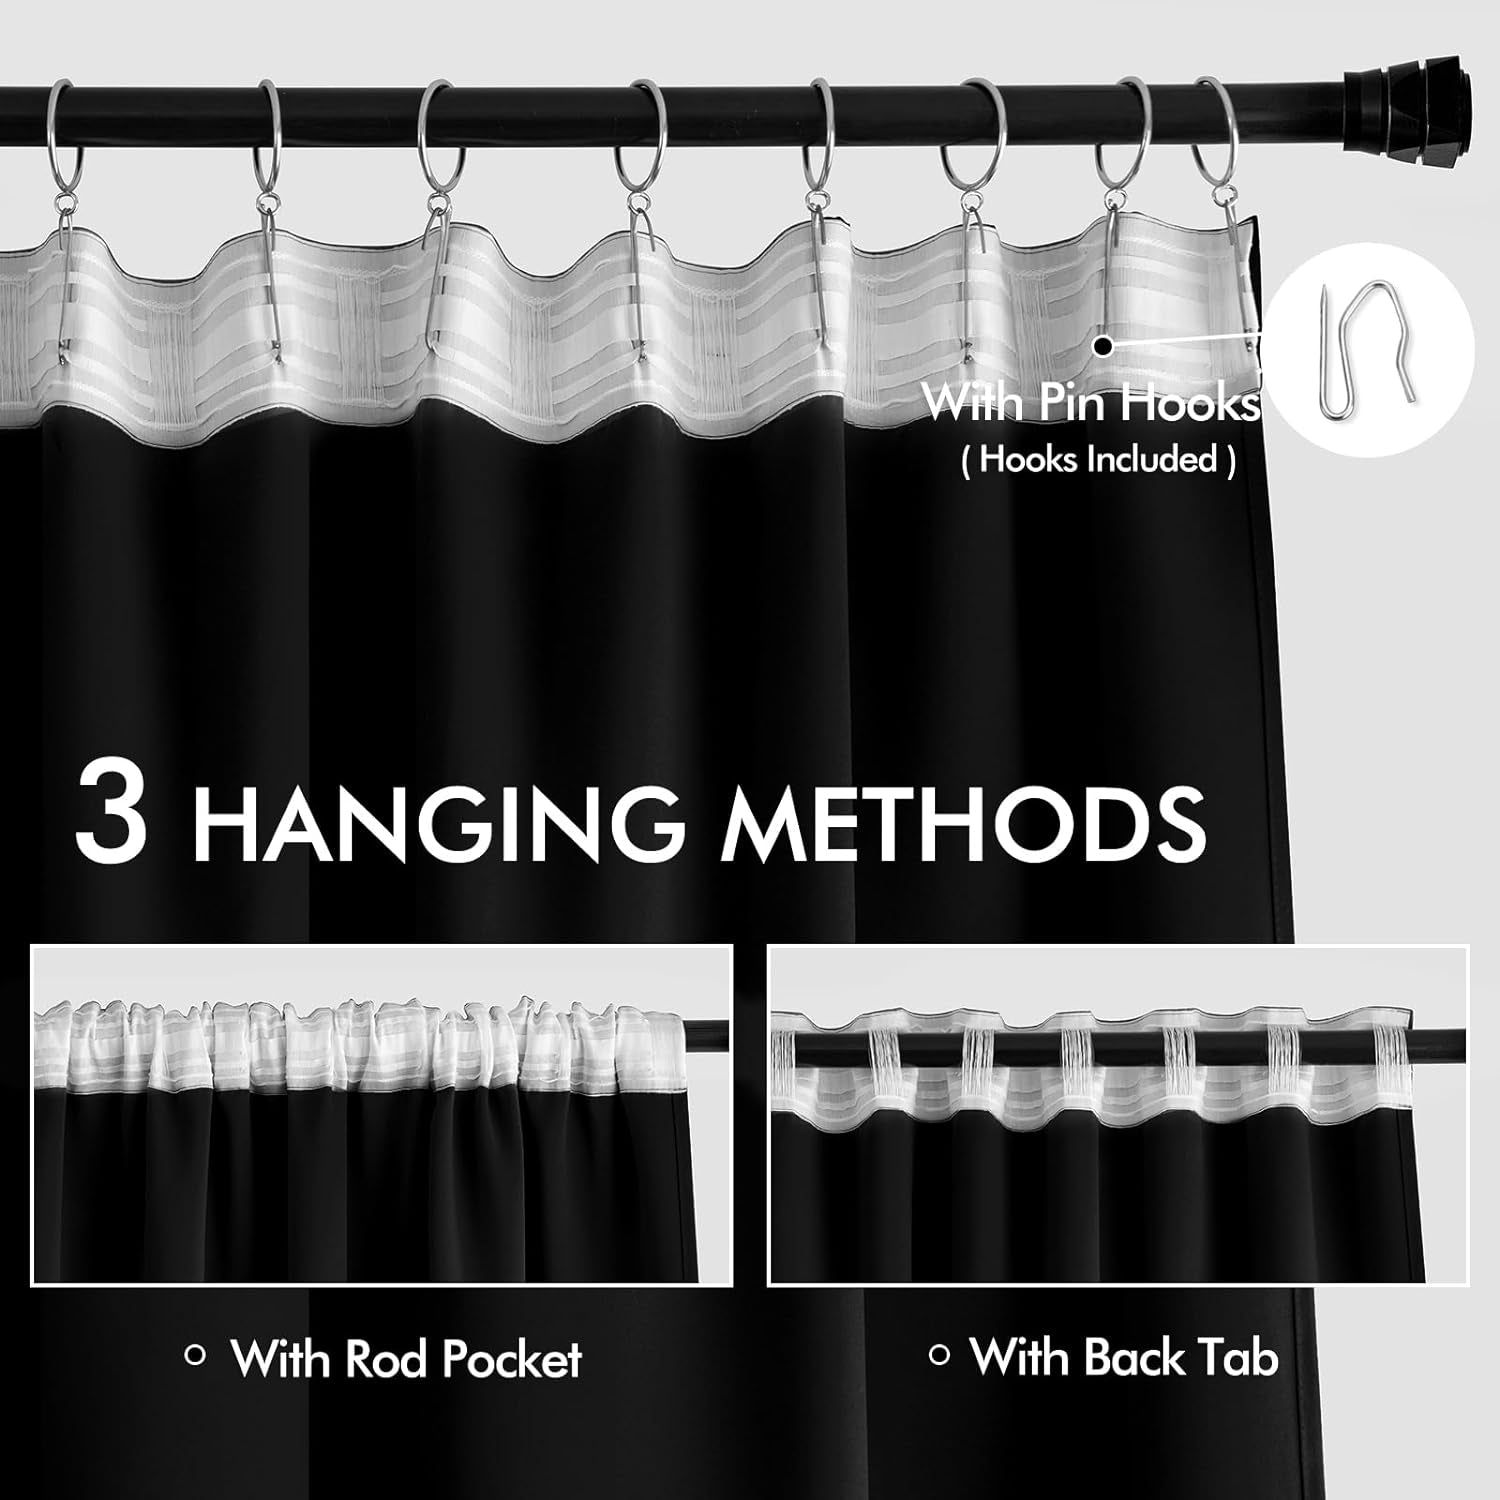 MIULEE 2 Panels Back Tab Blackout Curtains 96 Inch Long for Living Room Bedroom, Black Rod Pocket/Pinch Pleated Thermal Insulated Room Darkening Light Blocking Floor to Ceiling Curtains/Drapes  MIULEE   